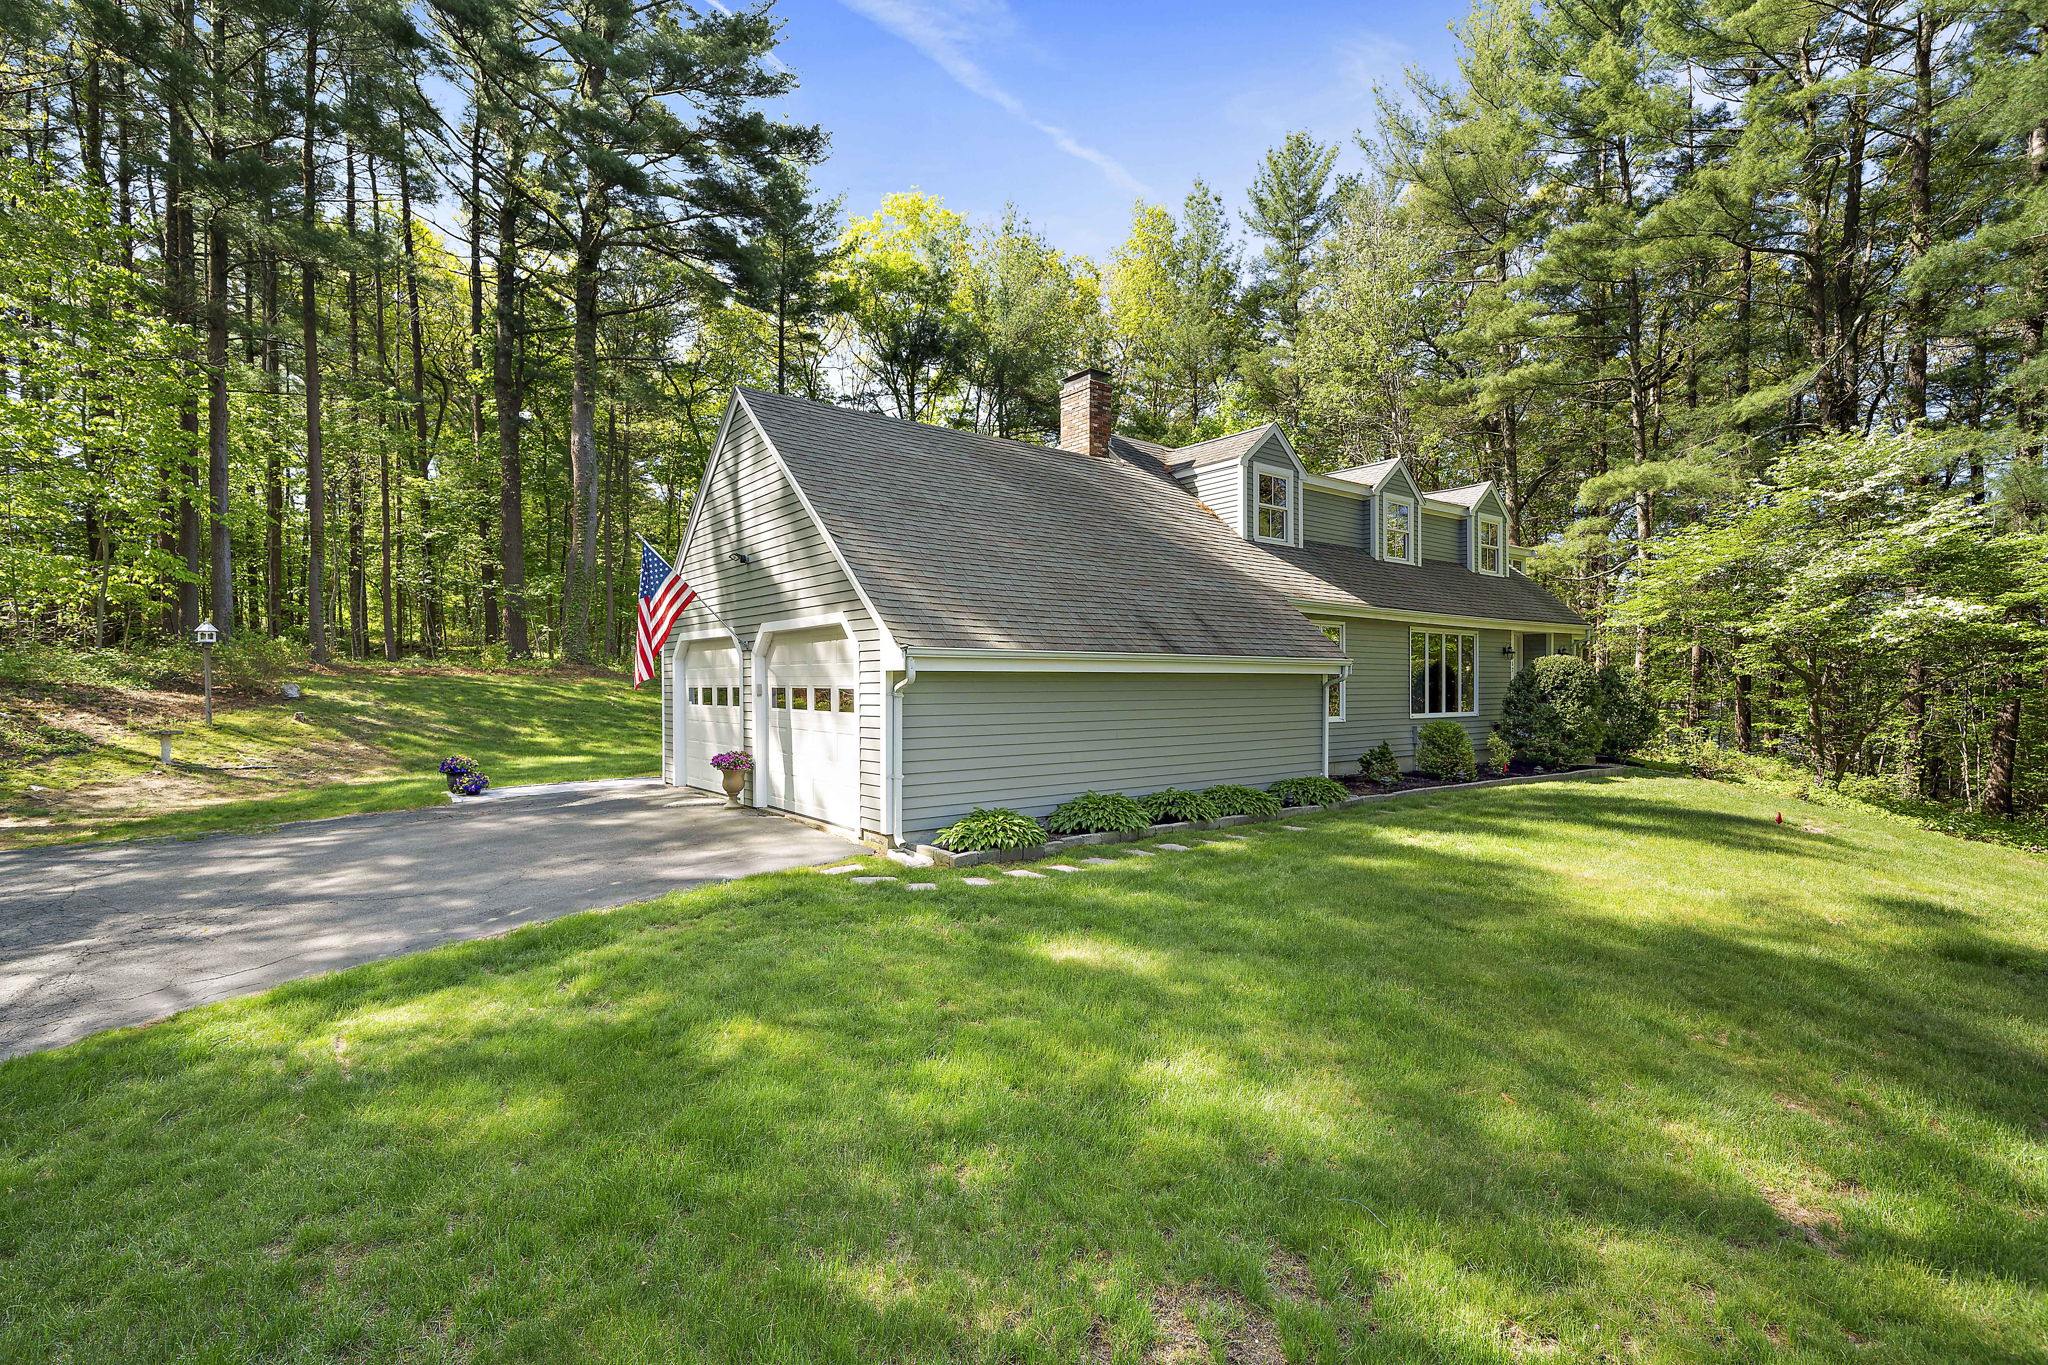  17 Copeland Tannery Dr, Norwell, MA 02061, US